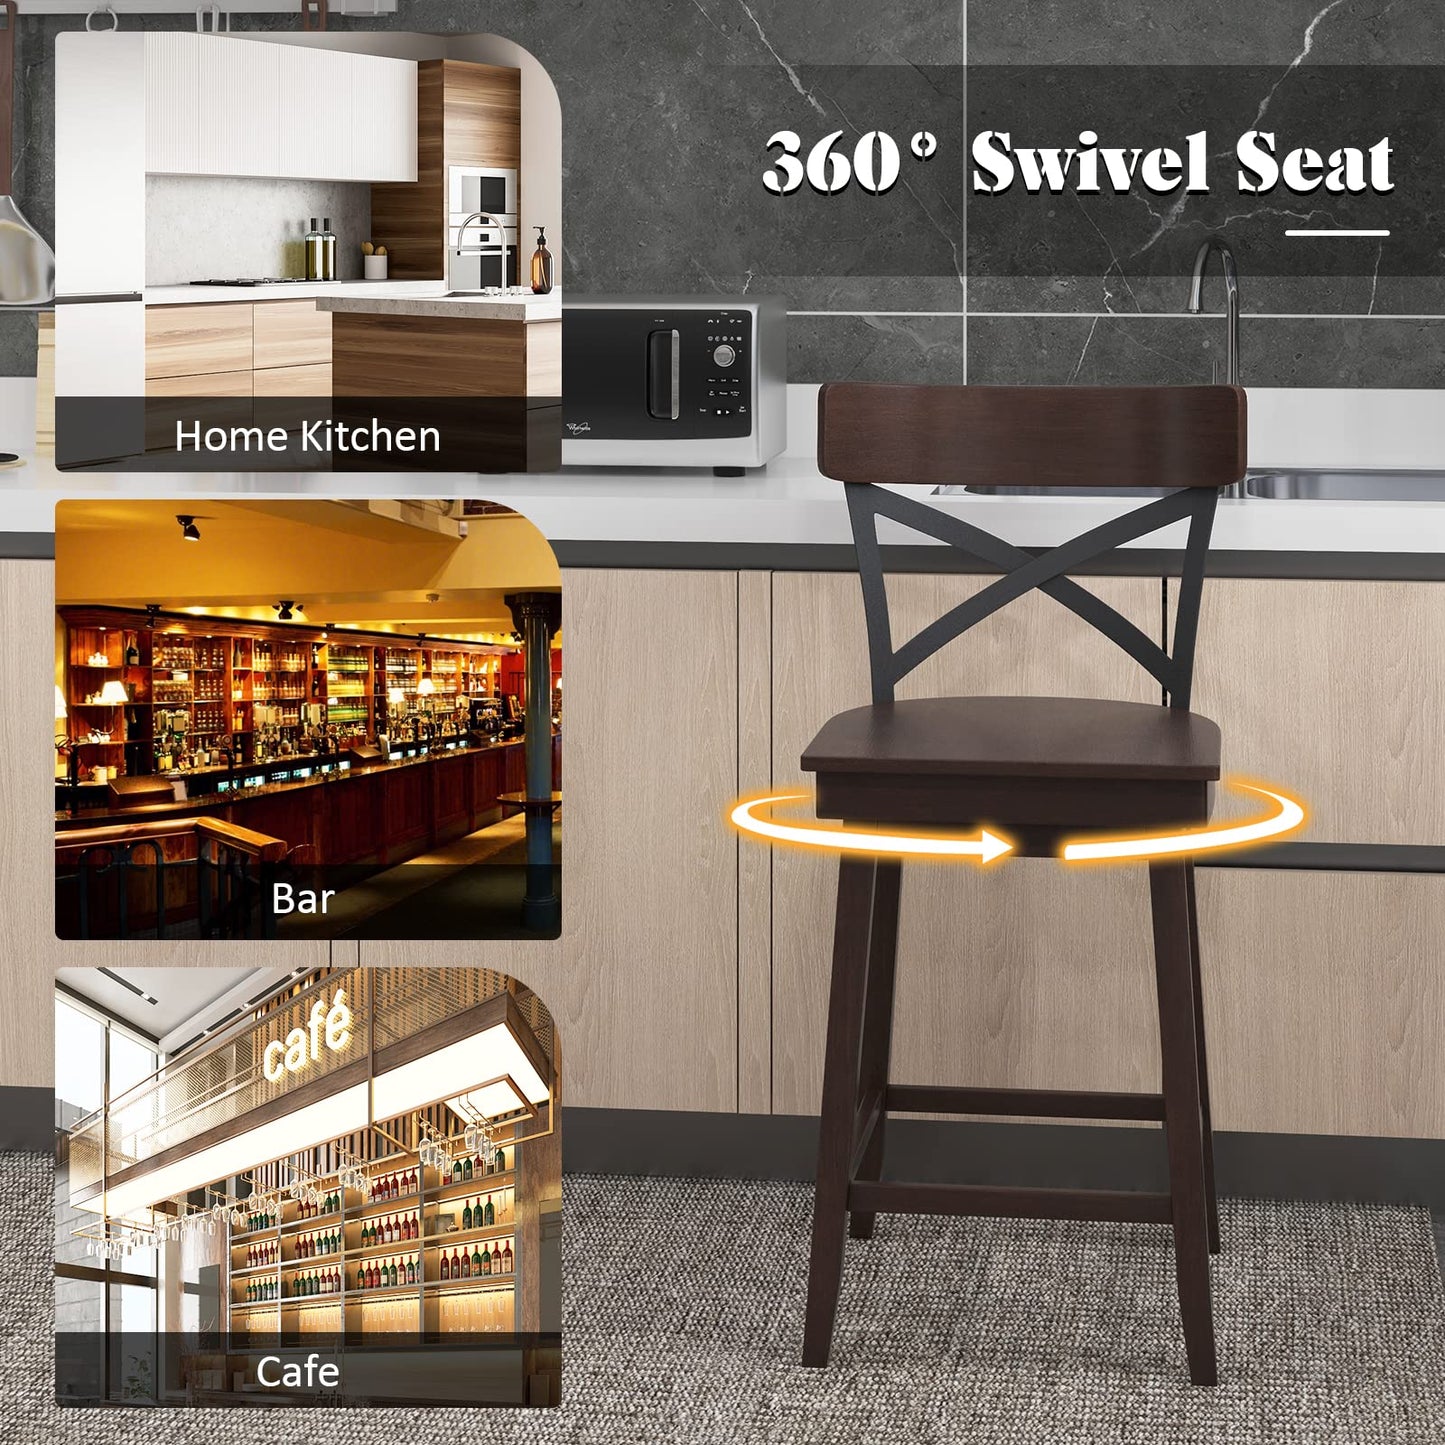 COSTWAY Swivel Bar Stool Set of 2, 24 Inch Ergonomic Counter Height Chairs with Open X Back & Footrest, 2PCS Vintage Wooden Barstools for Kitchen